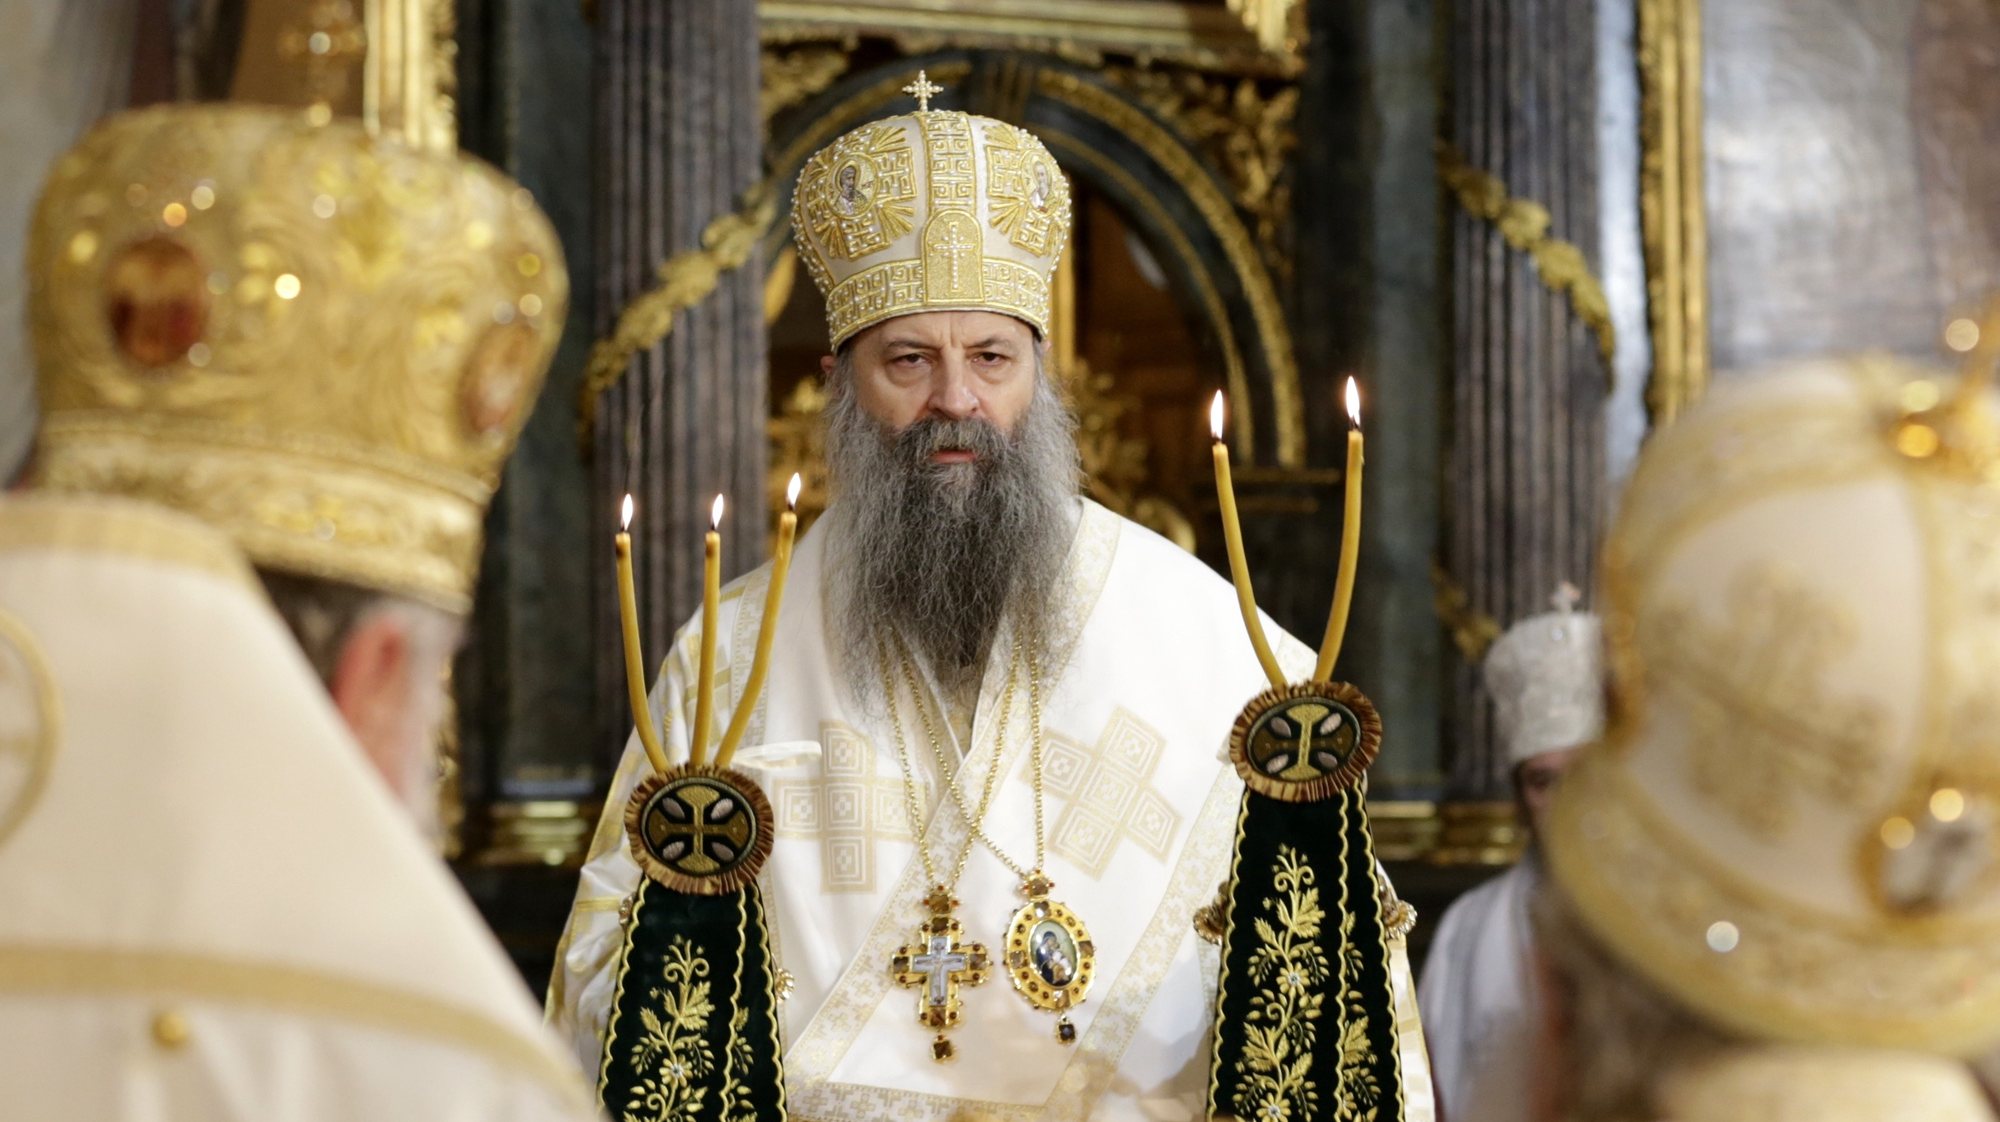 epa09023354 The new head of the Serbian Orthodox Church, Patriarch Porfirije leads a mass in Belgrade, Serbia, 19 February 2021. Serbian Orthodox Church enthroned its 46th leader after he was elected on 18 February 2021.  EPA/ANDREJ CUKIC